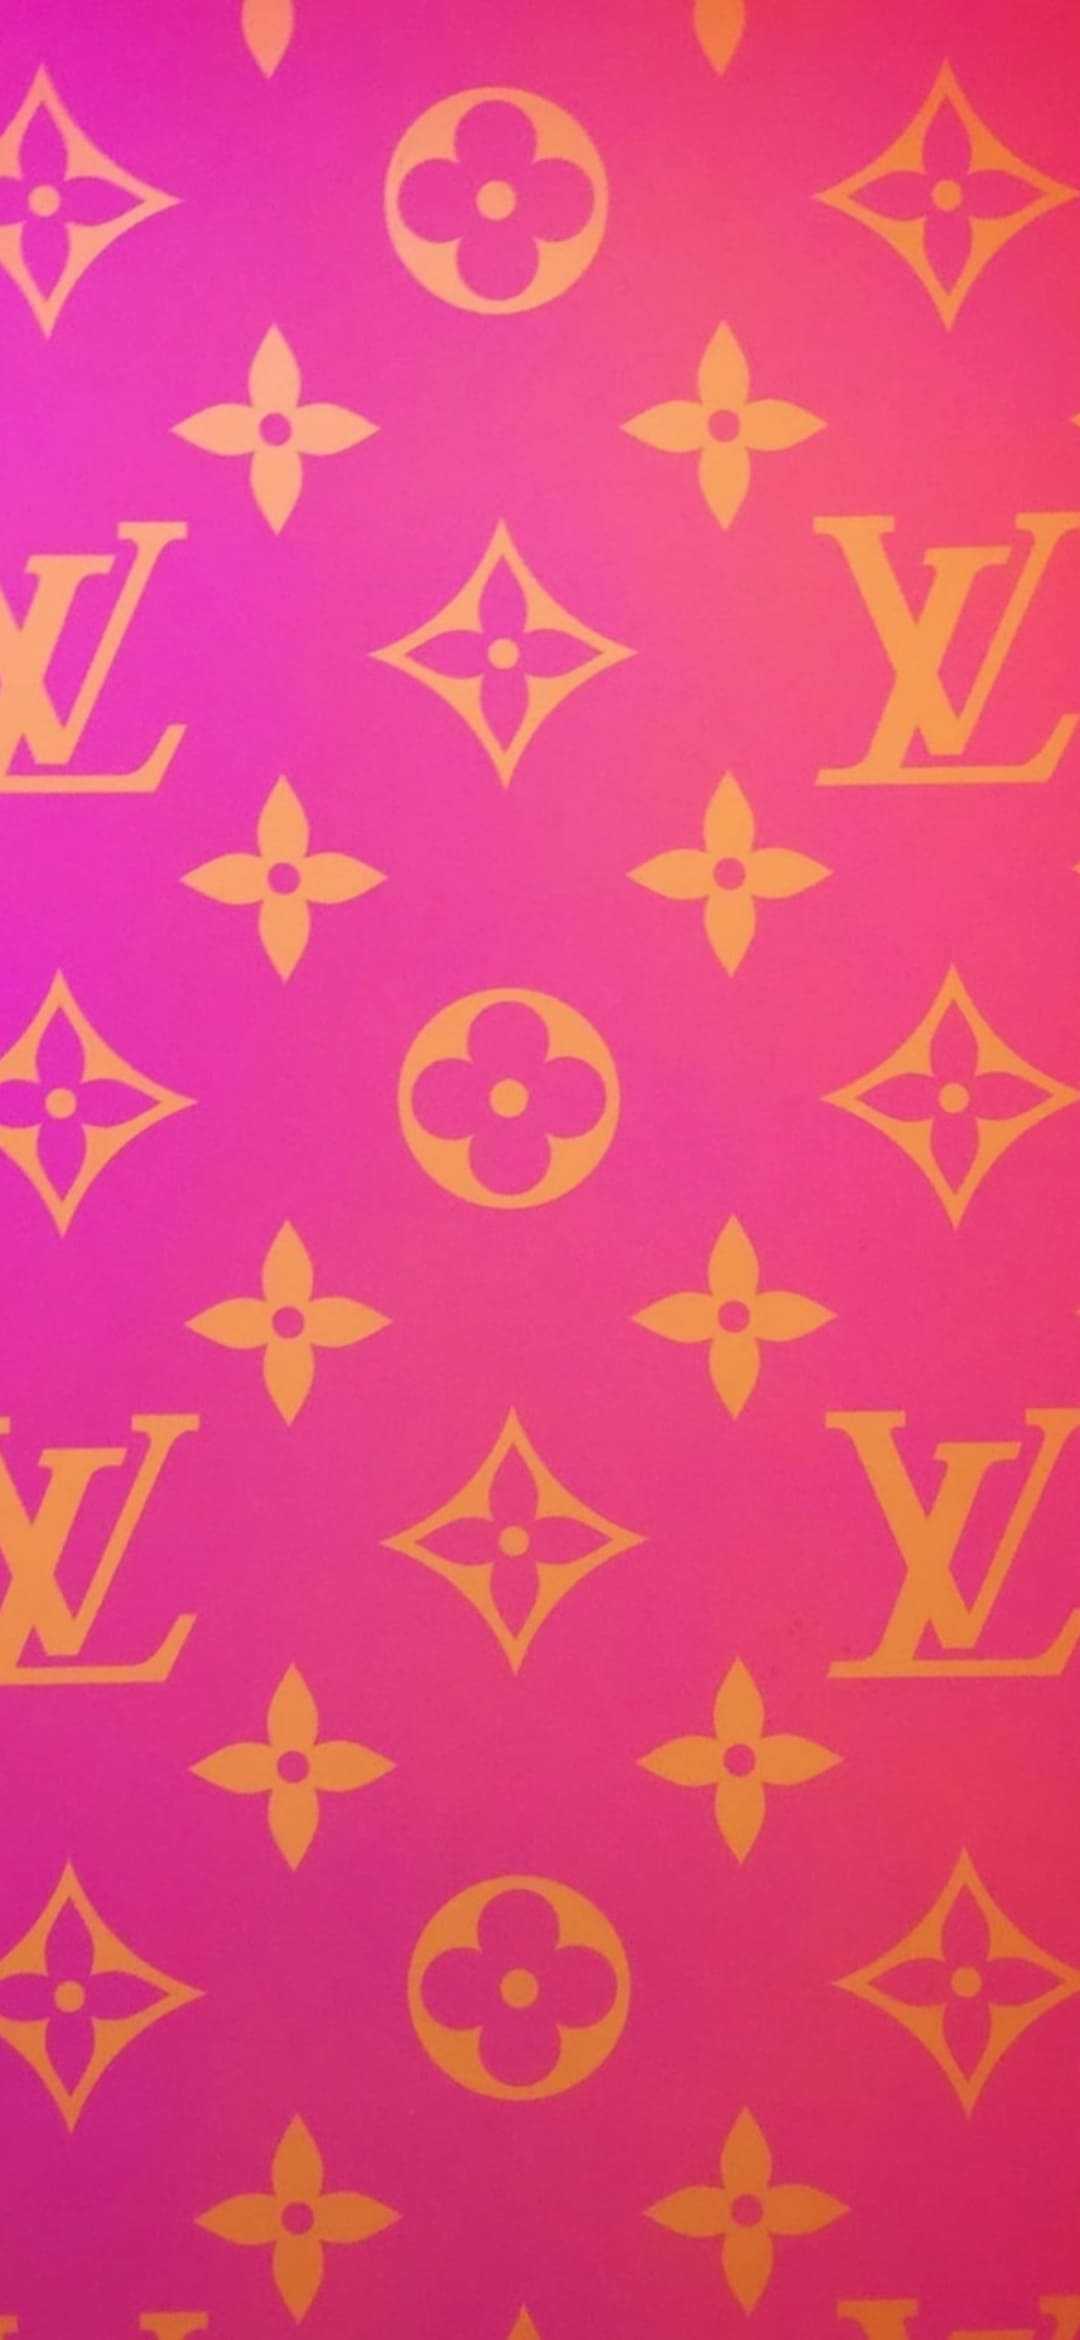 Louis Vuitton Wallpapers Pink - KoLPaPer - Awesome Free HD Wallpapers